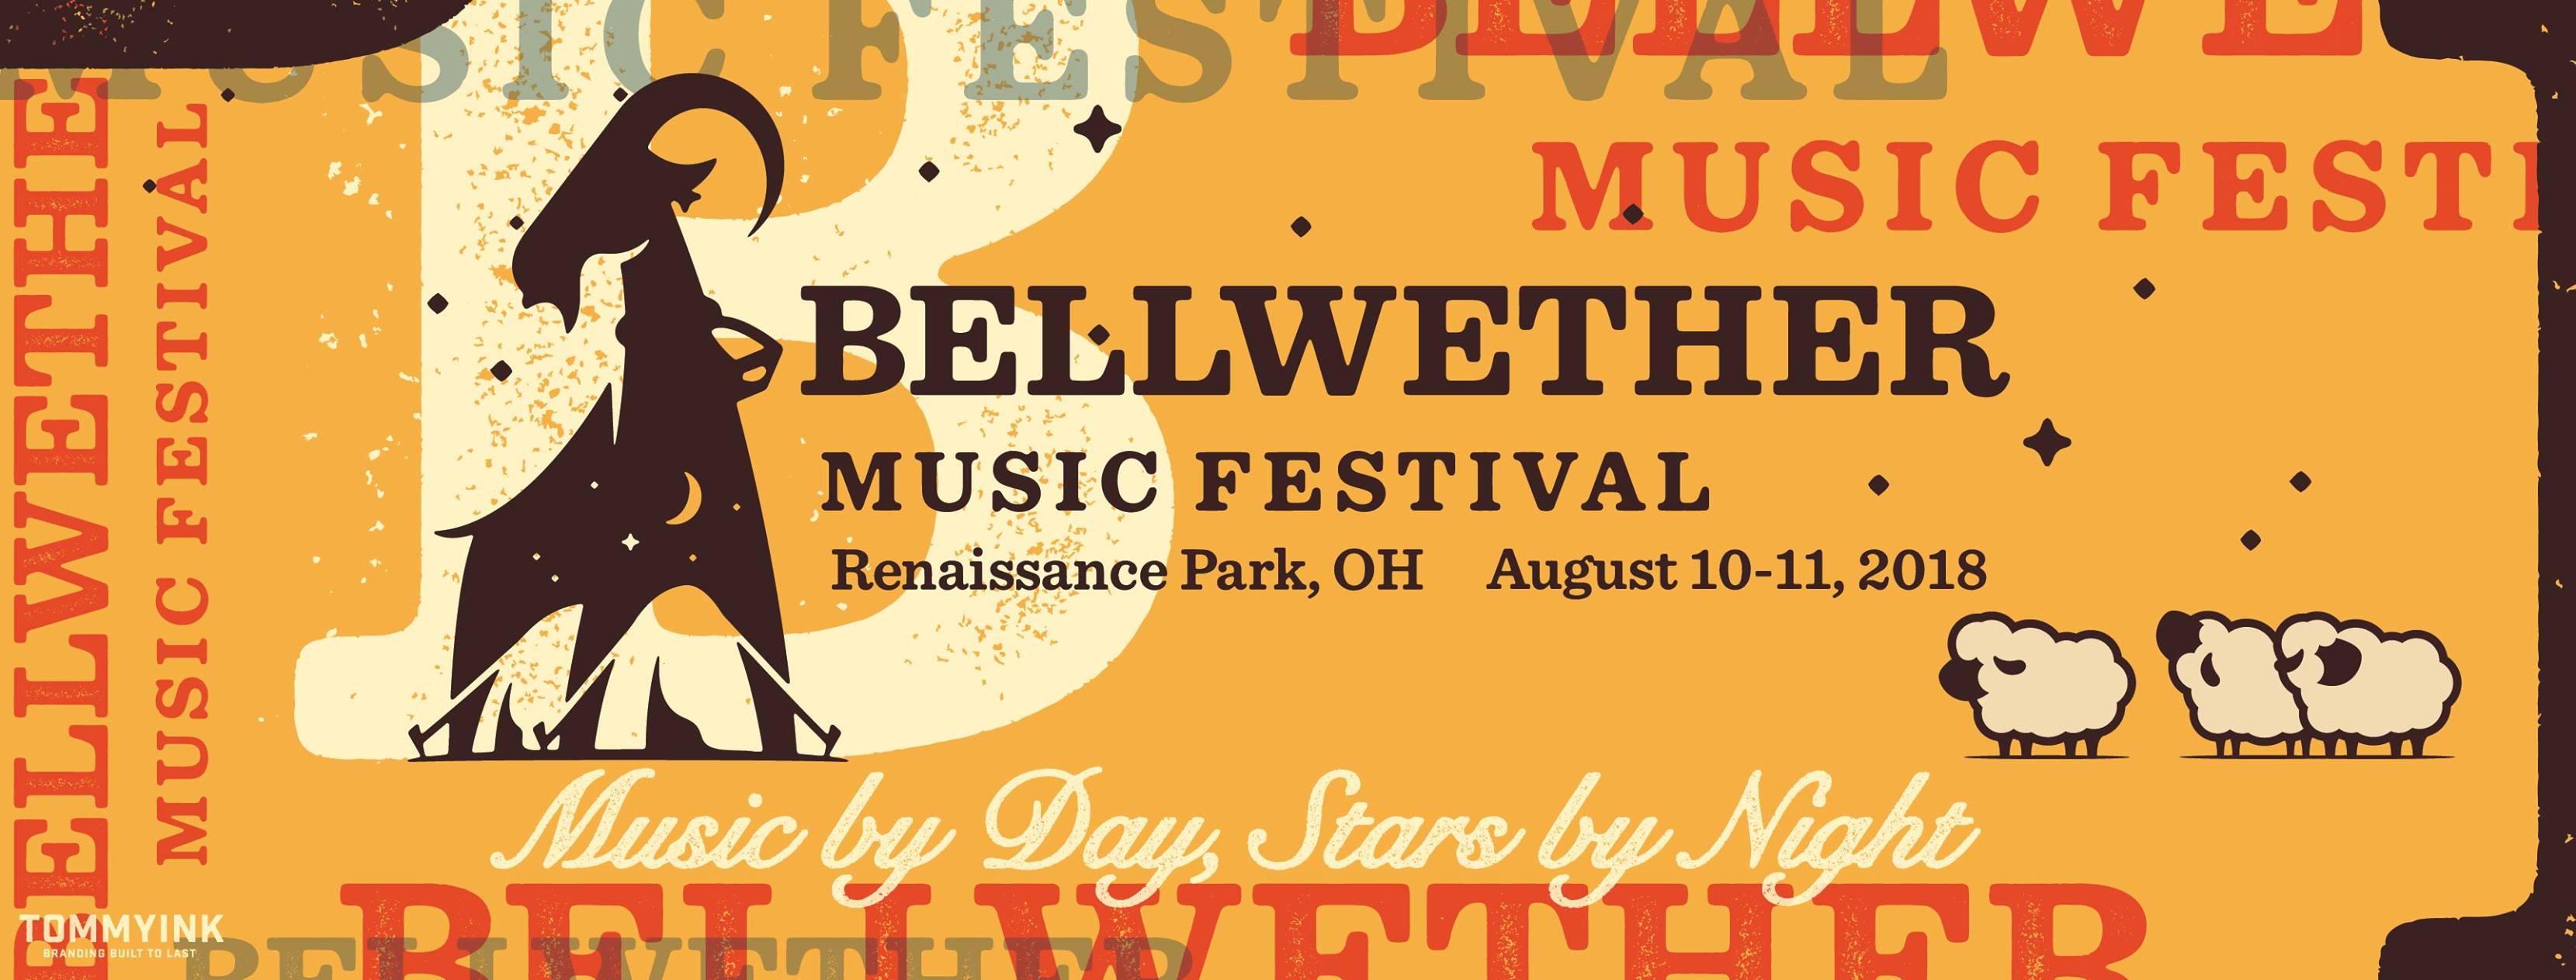 Bellwether Music Festival Tickets On Sale Now